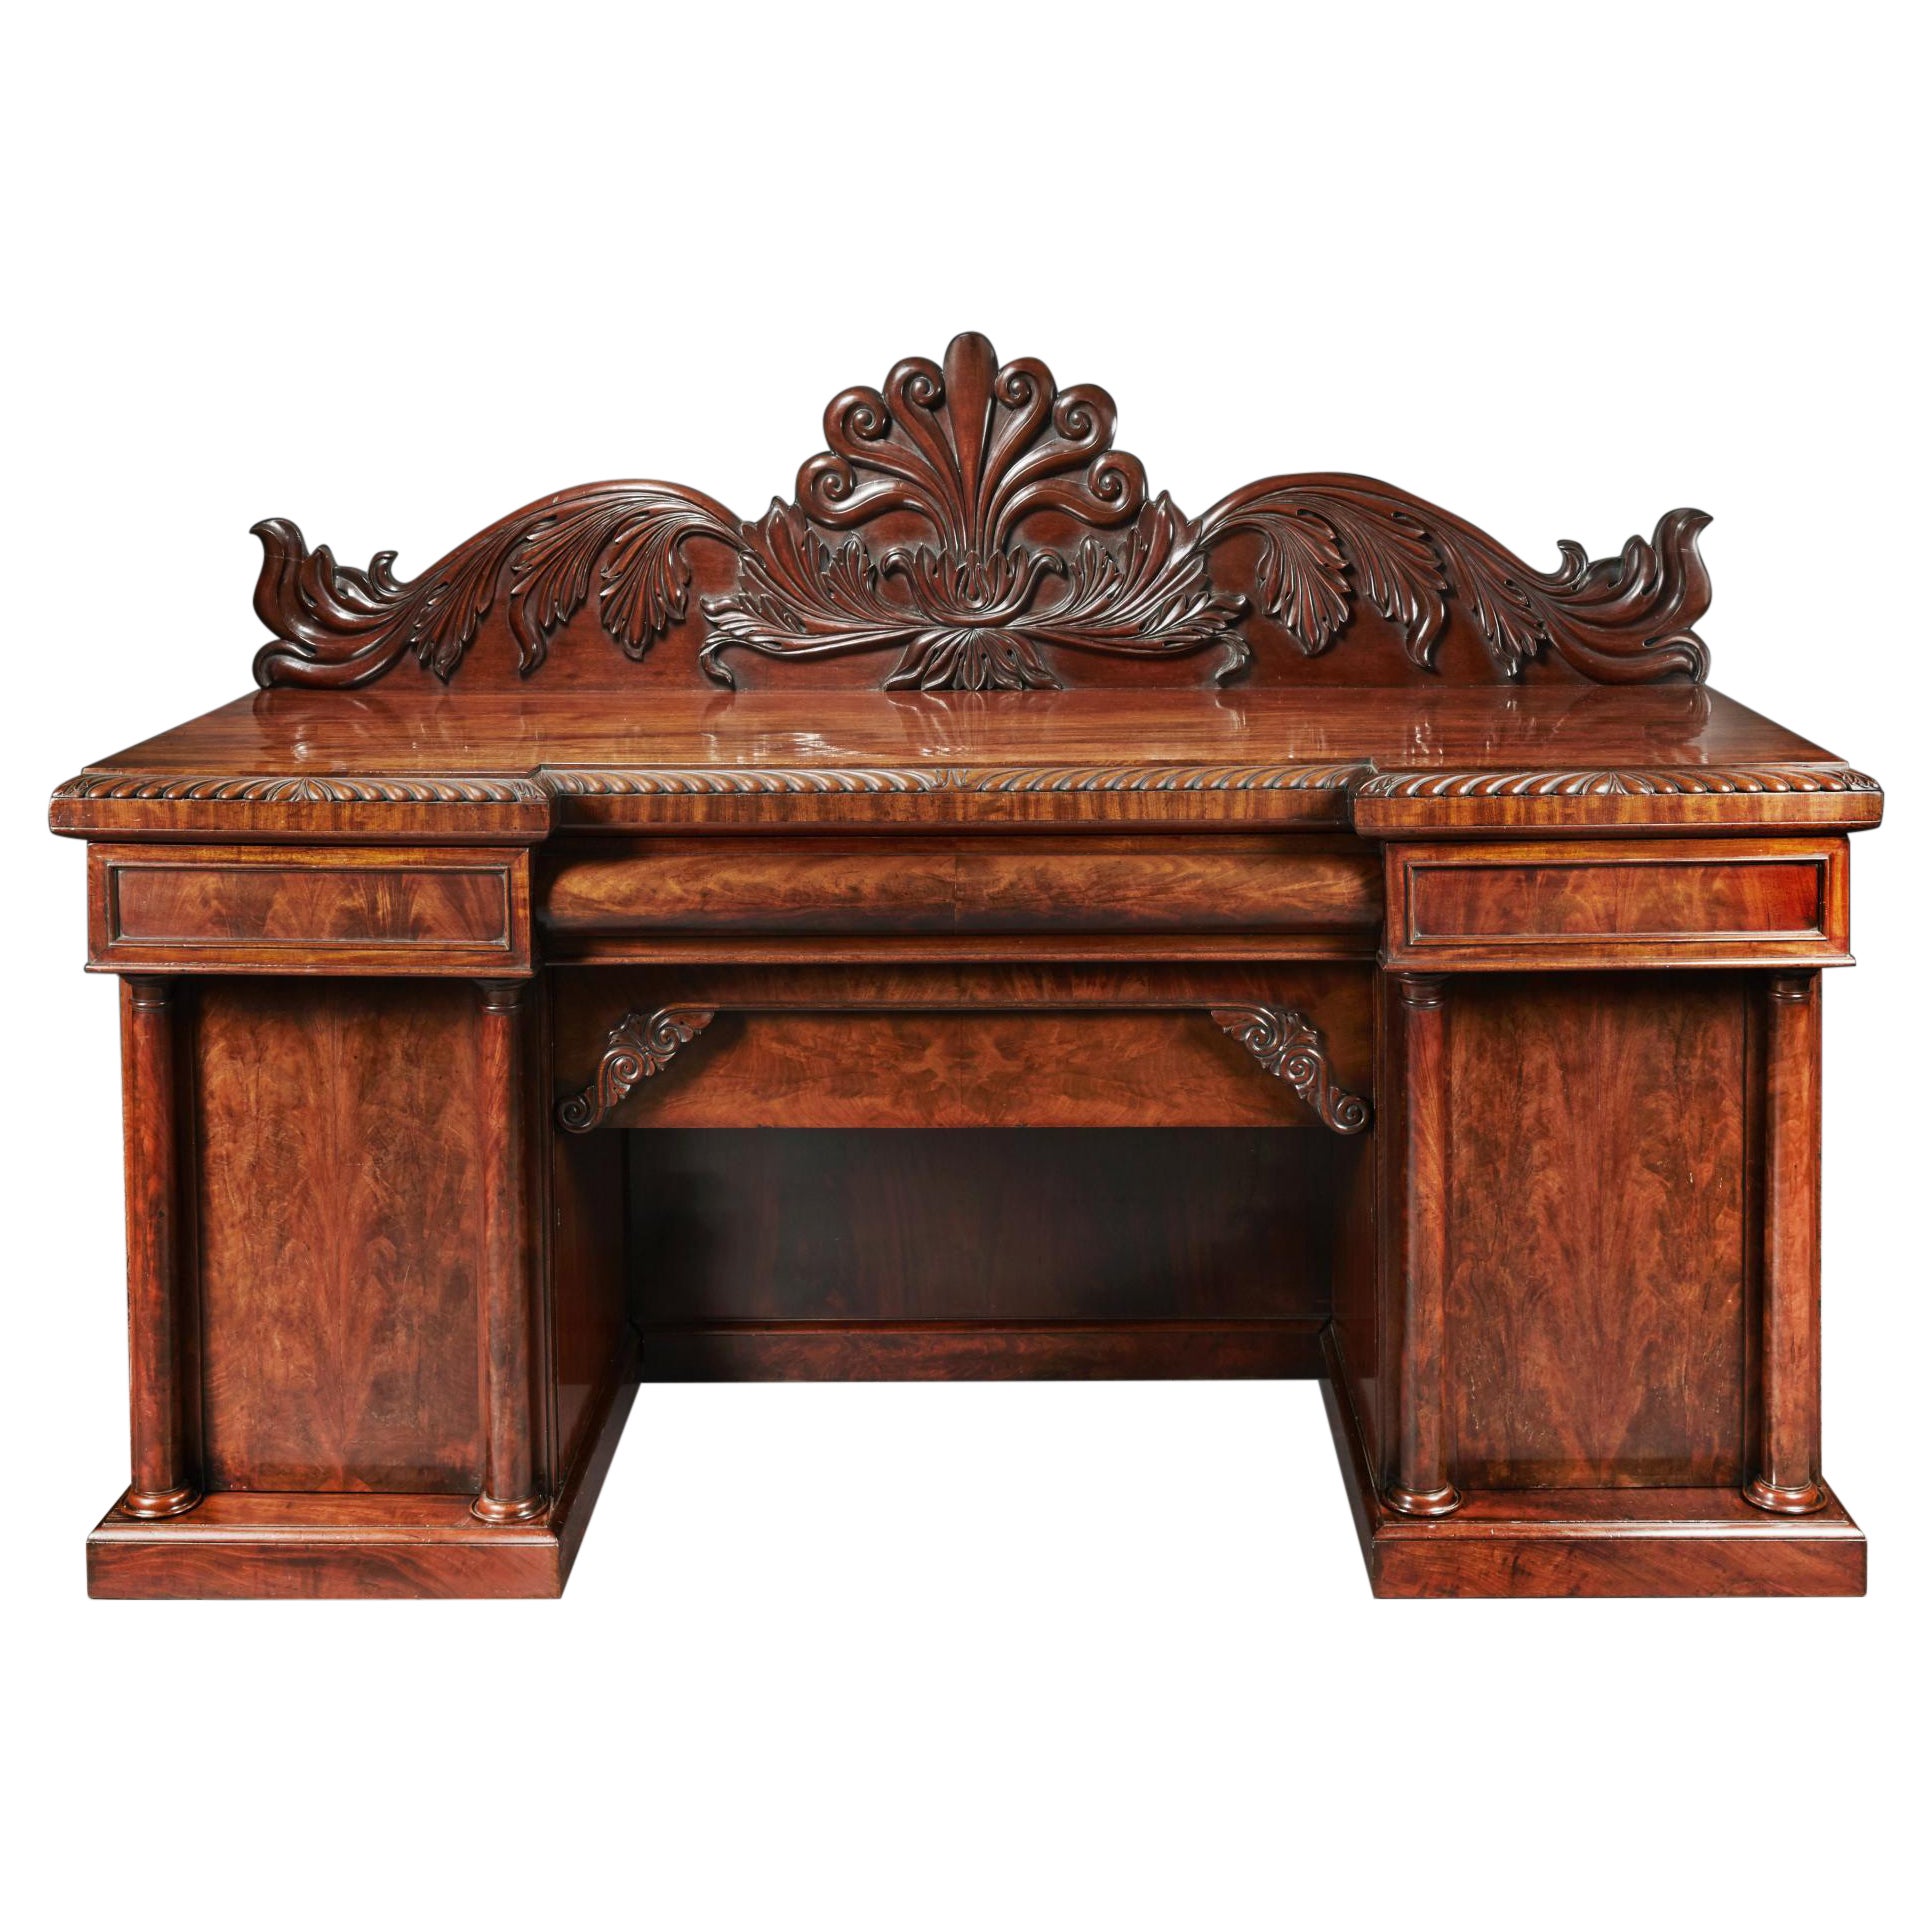 Mahagoni-Sideboard in hoher Qualität, William IV. Breakfront Front